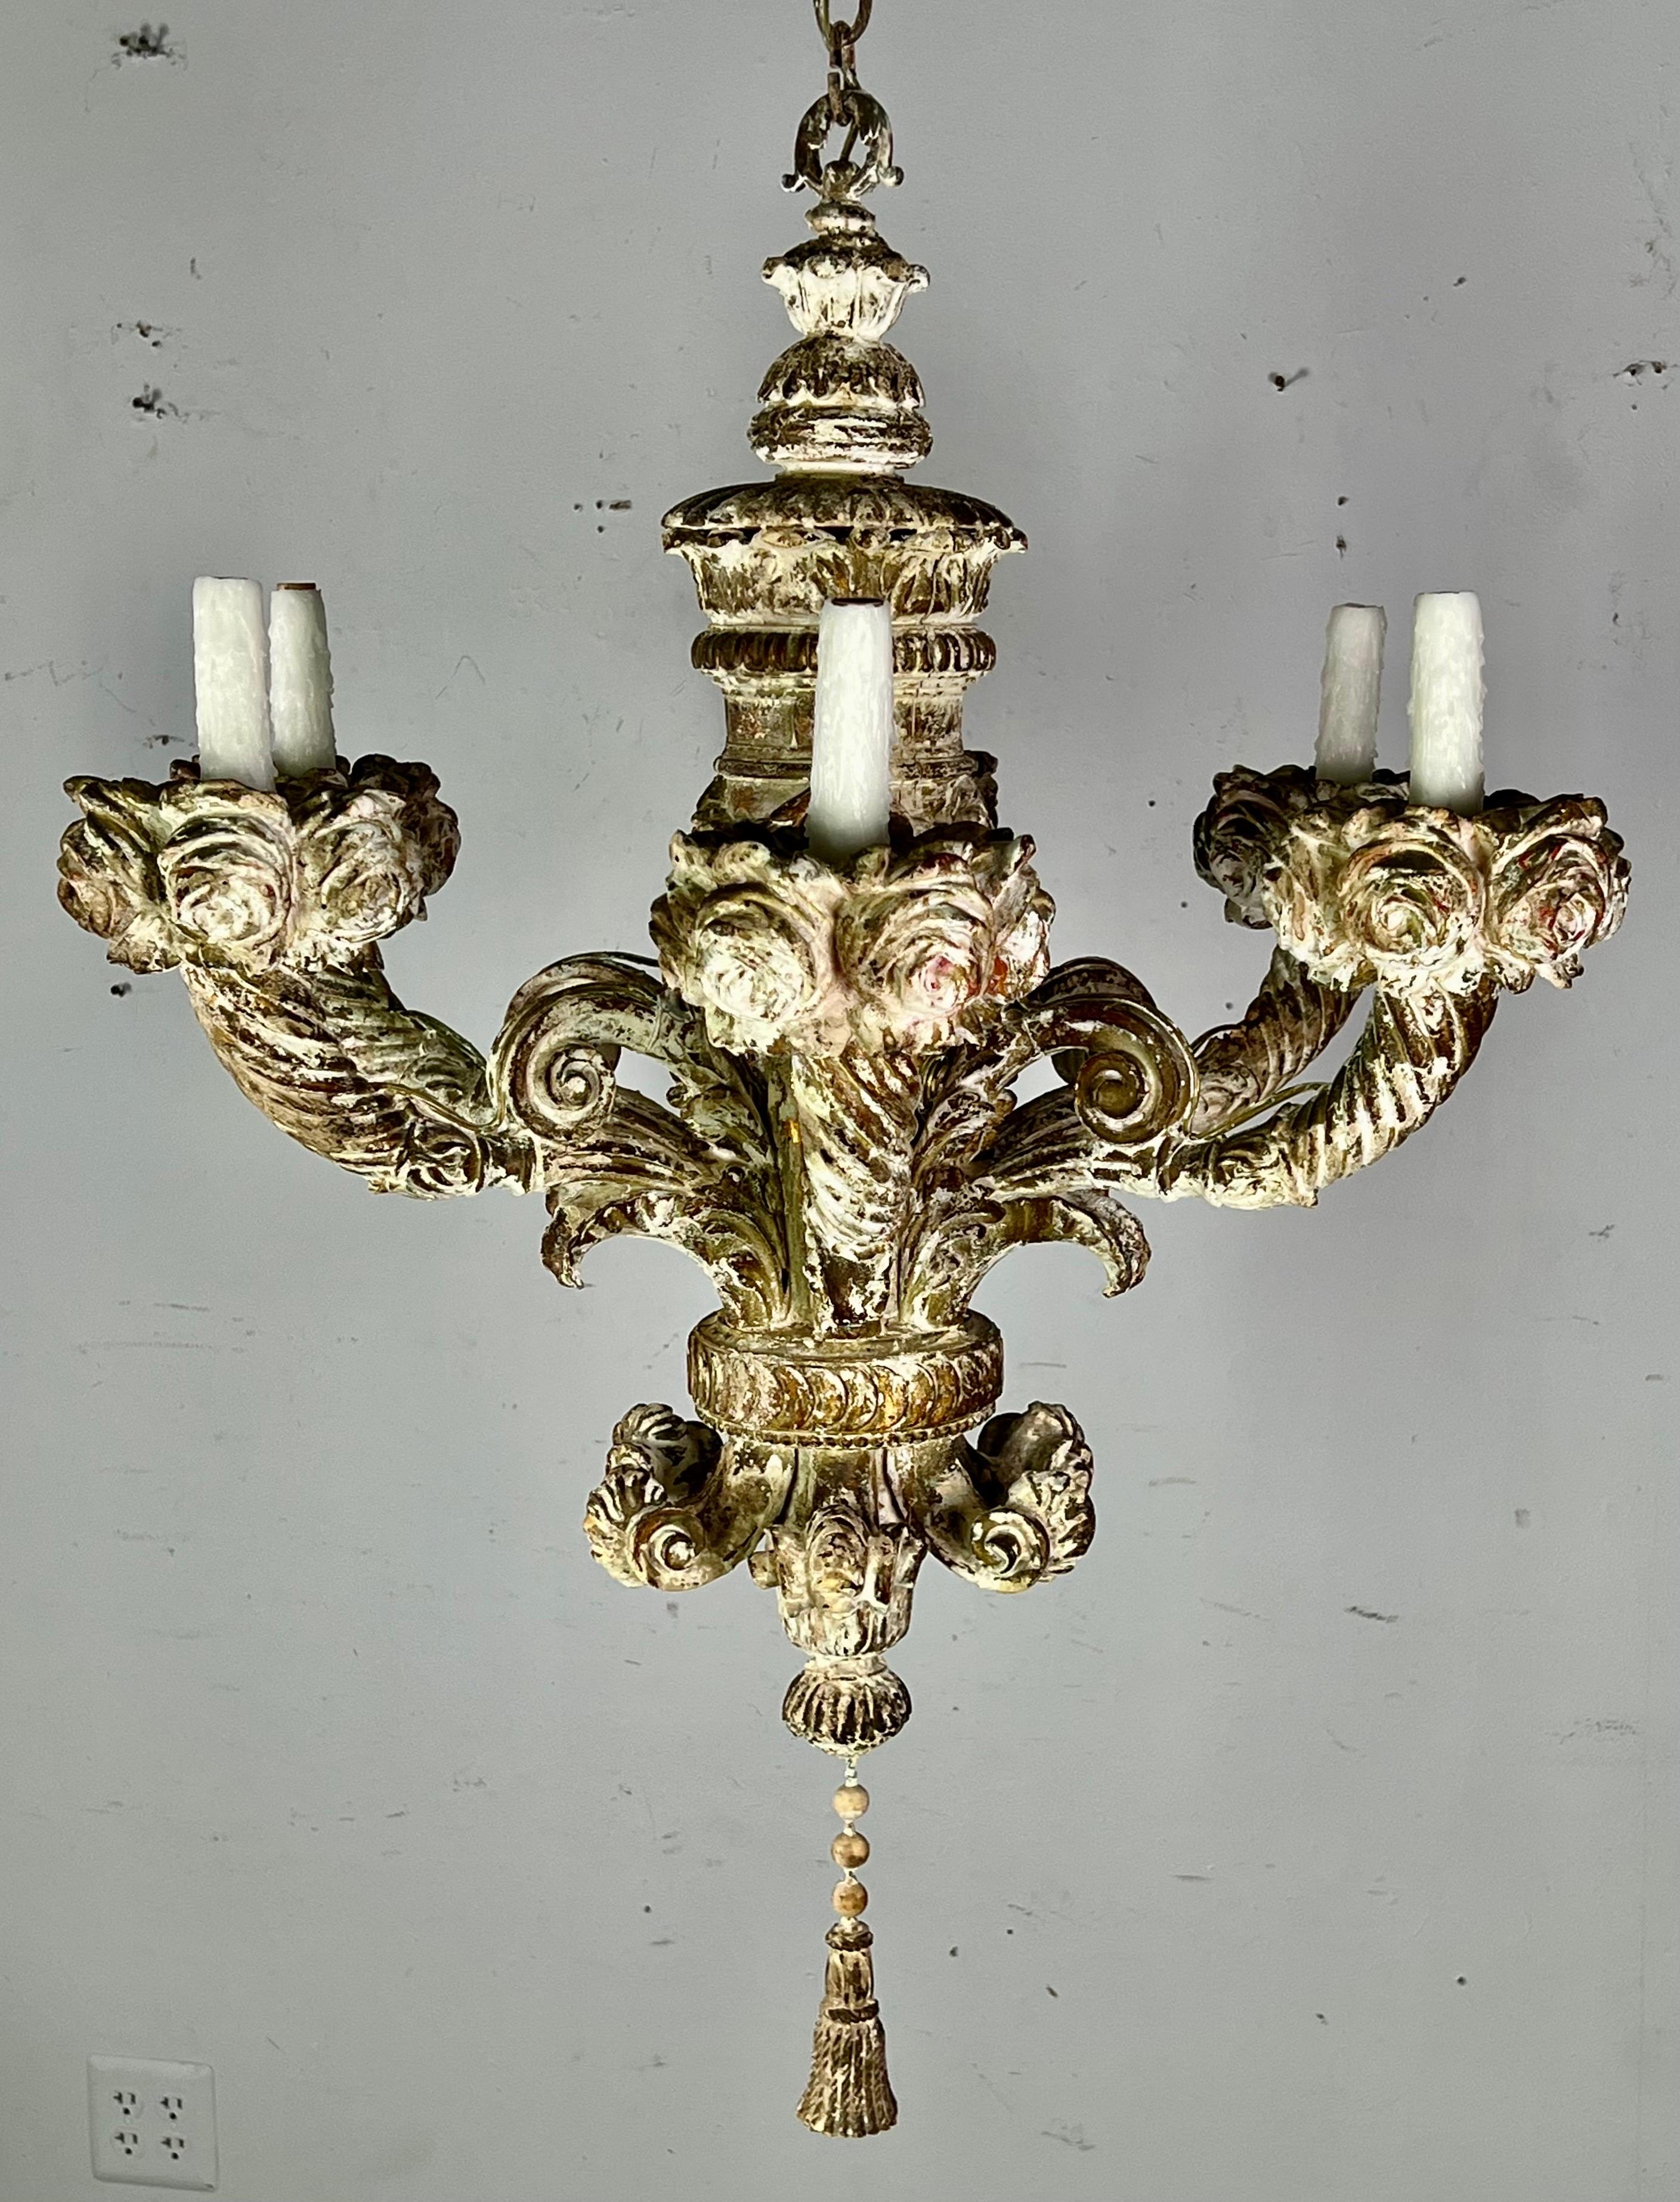 Six light 19th century carved wood French chandelier with beautiful worn painted finish throughout. The fixture is newly rewired and includes chain and canopy. Carved roses, acanthus leaves, scrolls and a carved tassel can be seen as well.